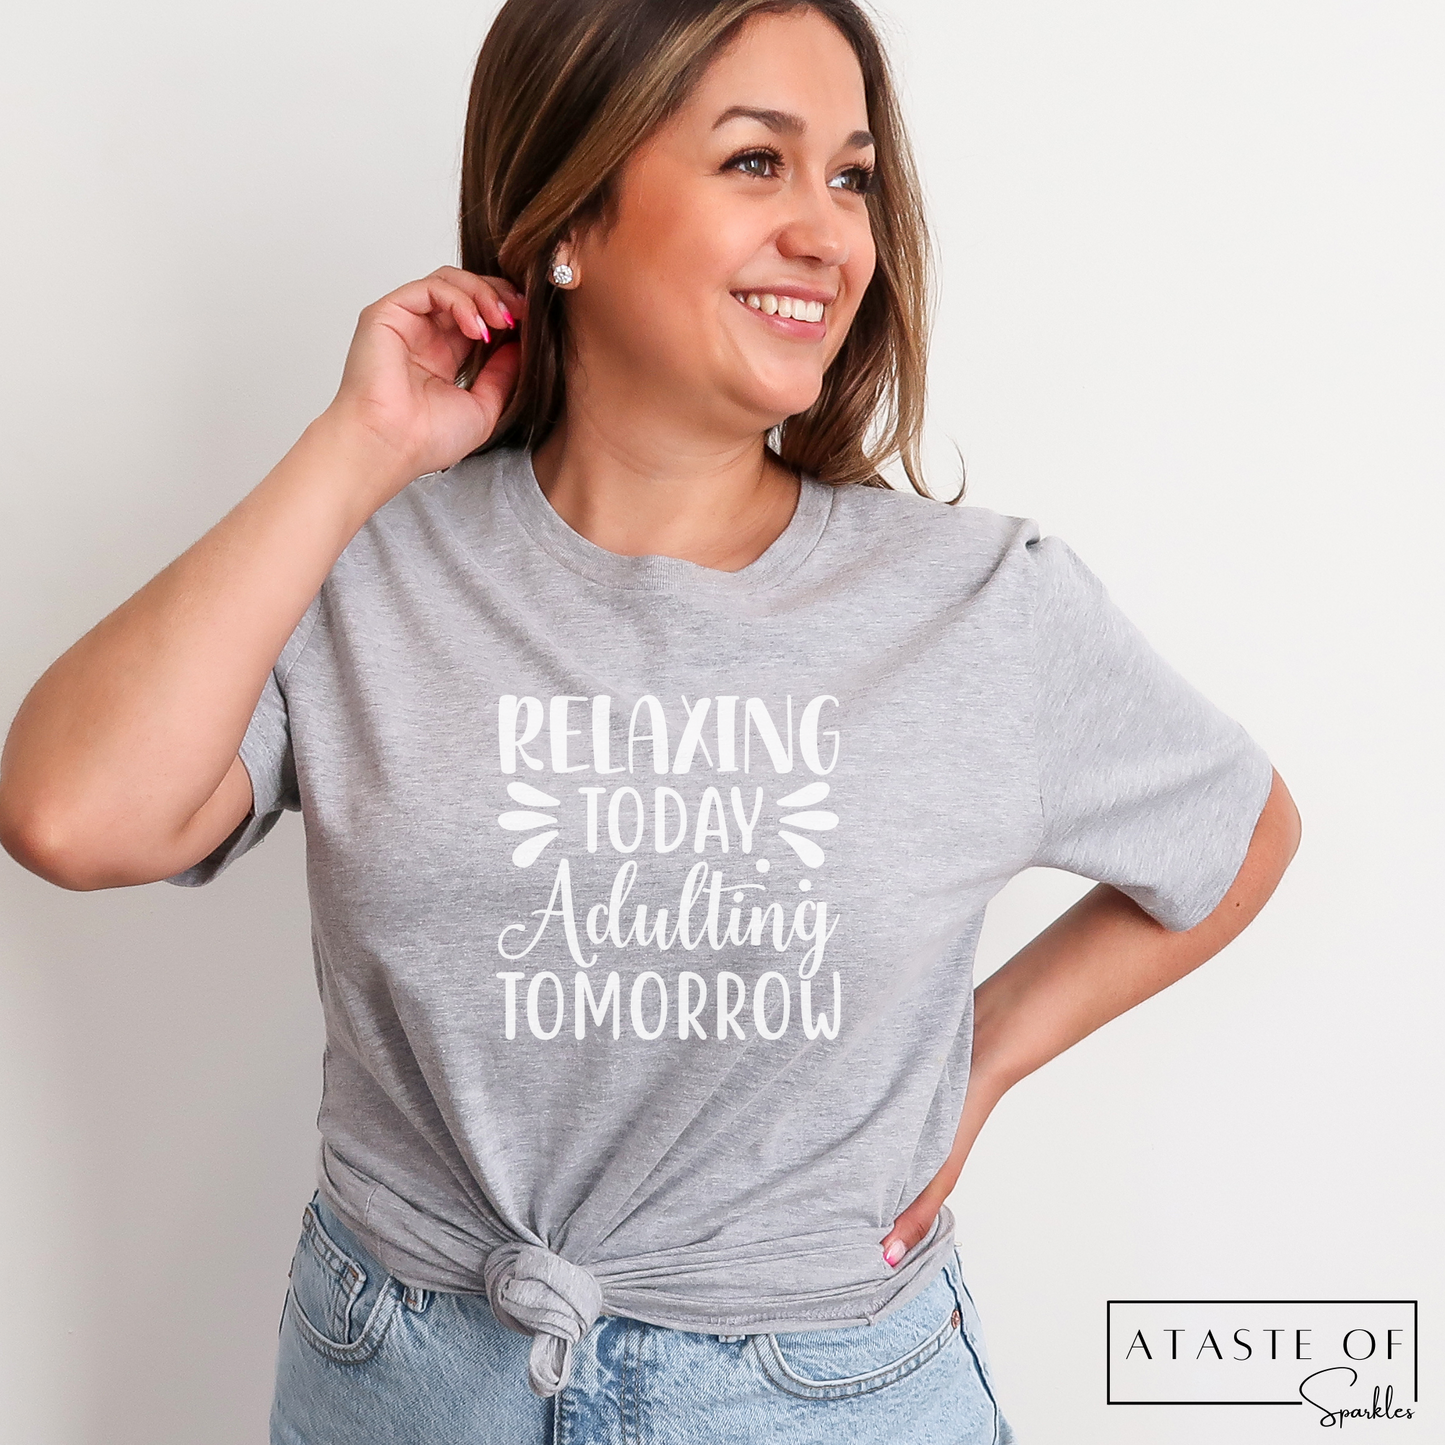 Relaxing Today Adulting Tomorrow T-shirt